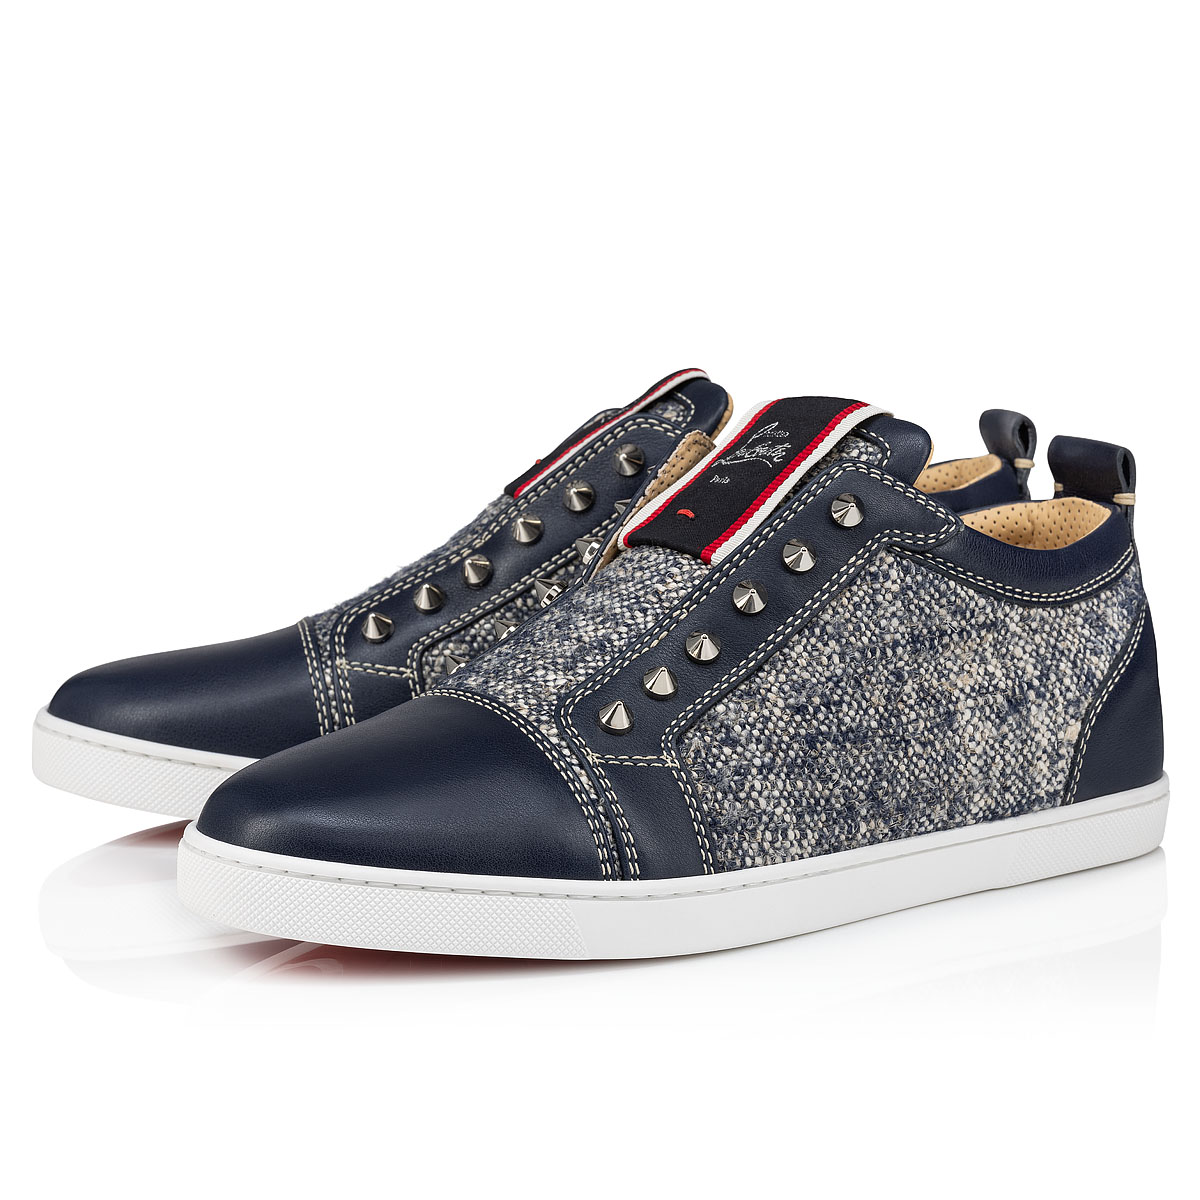 Louboutin calf leather Fique - States United Vontade - F.A.V Navy Sneakers - Christian A - Wool and